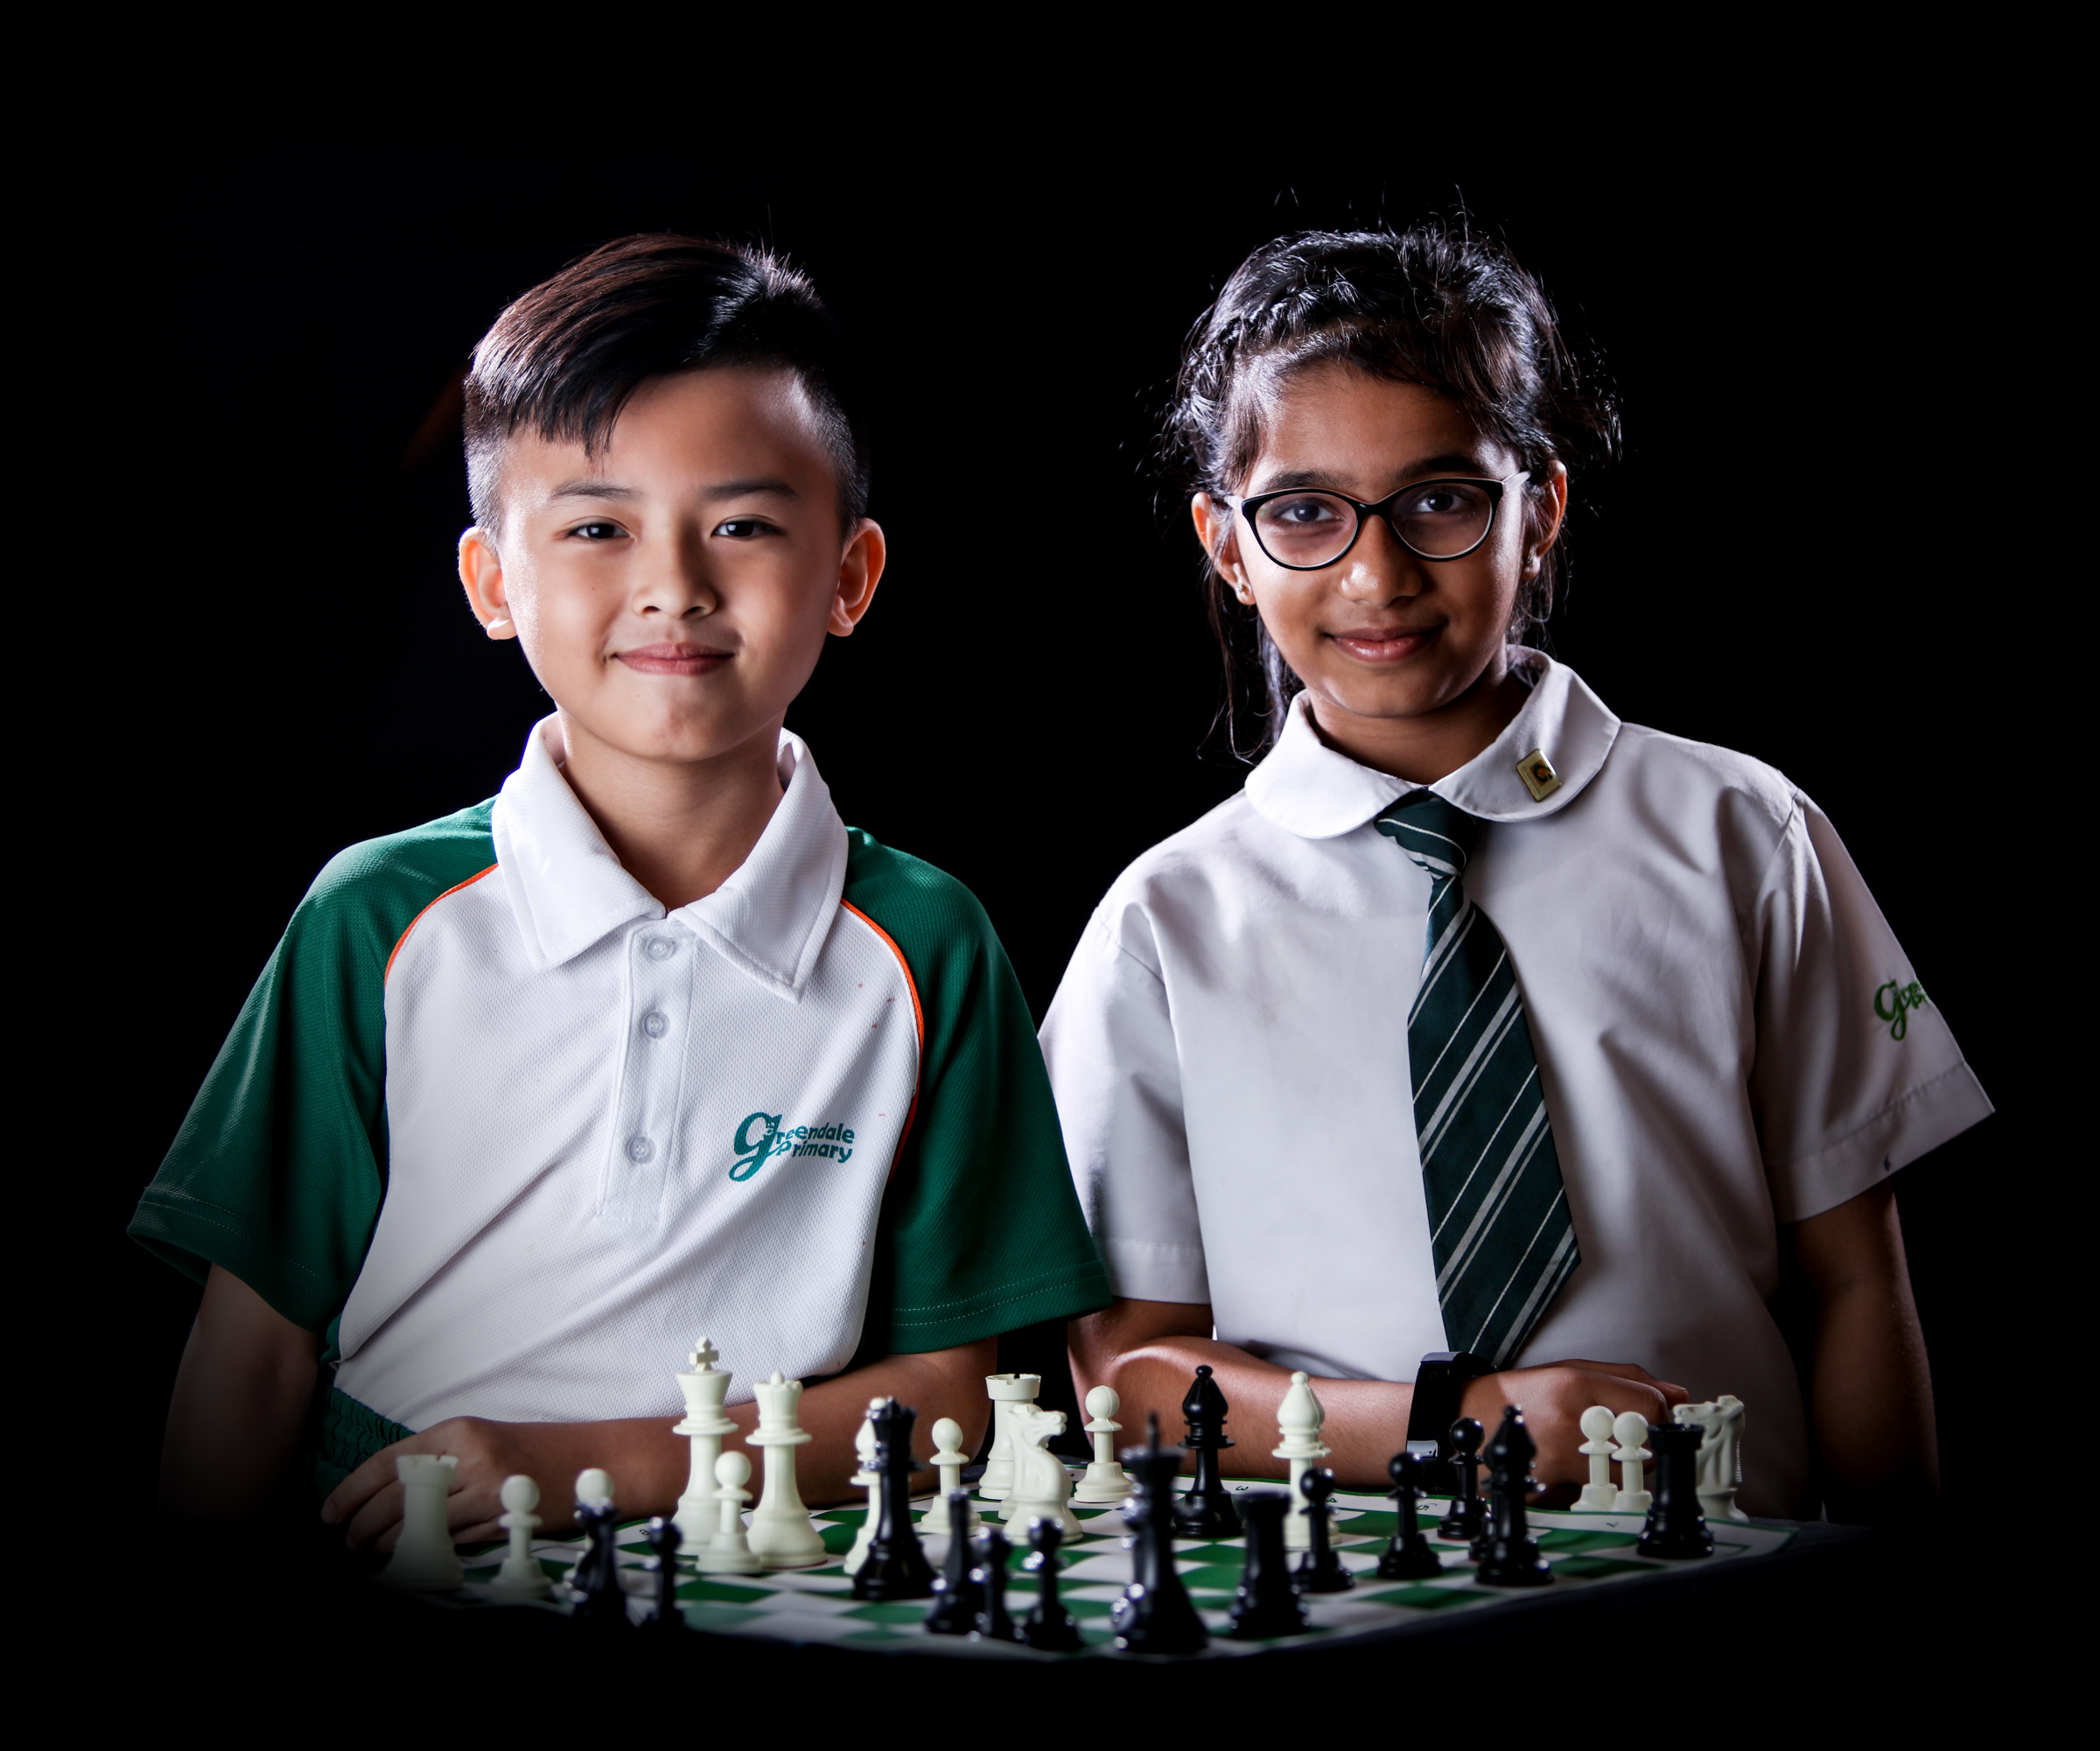 Tactical moves for Chess Club